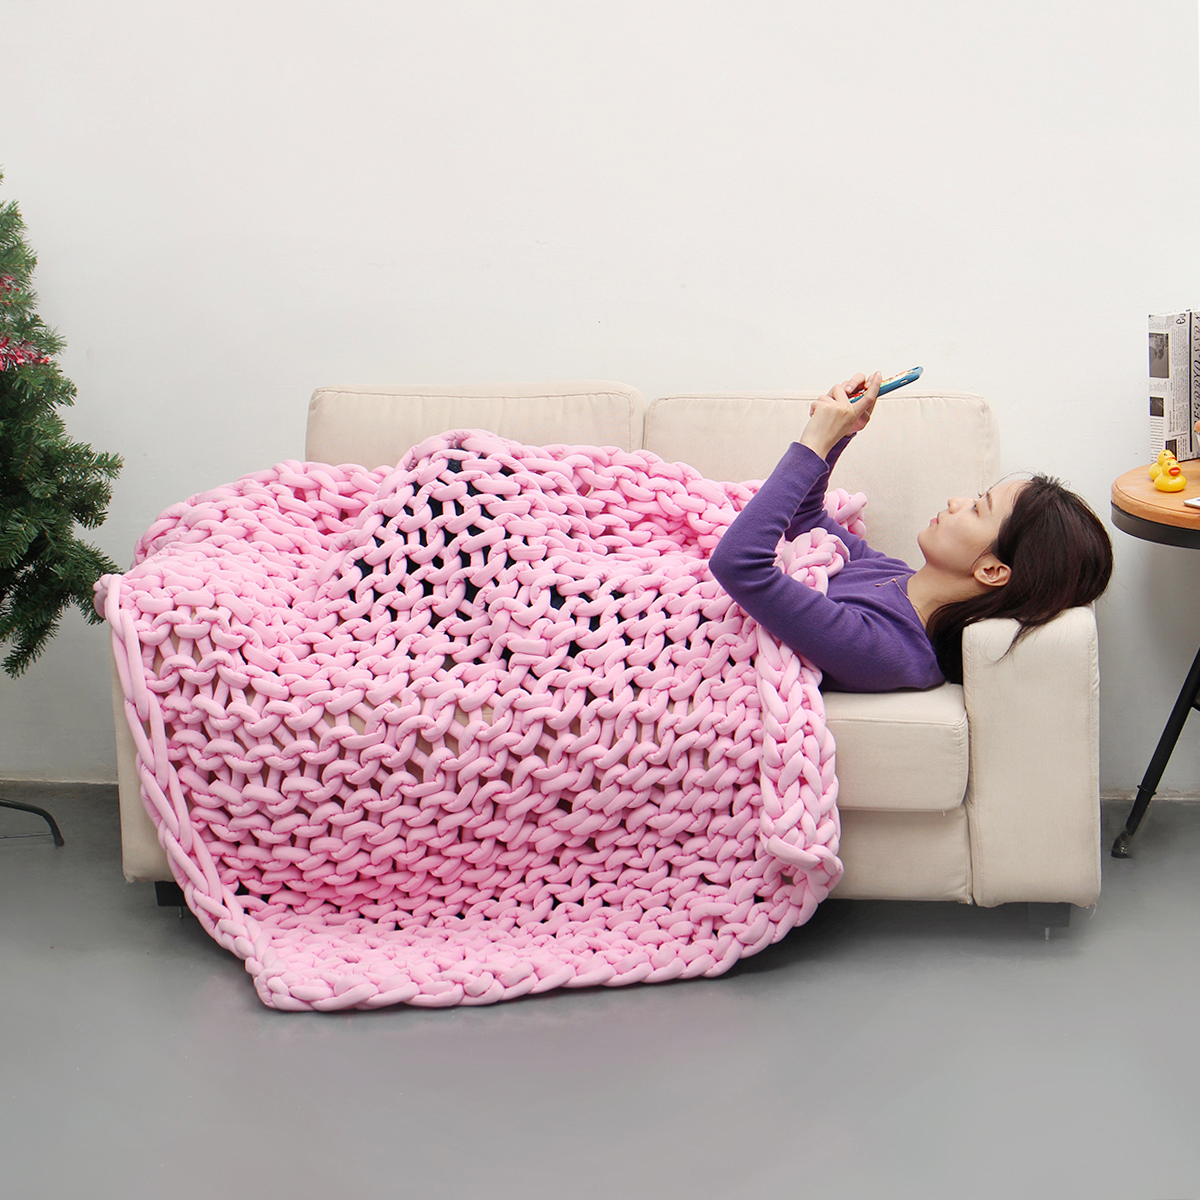 100x120cm-Handmade-Knitted-Blankets-Soft-Warm-Thick-Line-Cotton-Throw-Blankets-1484110-4